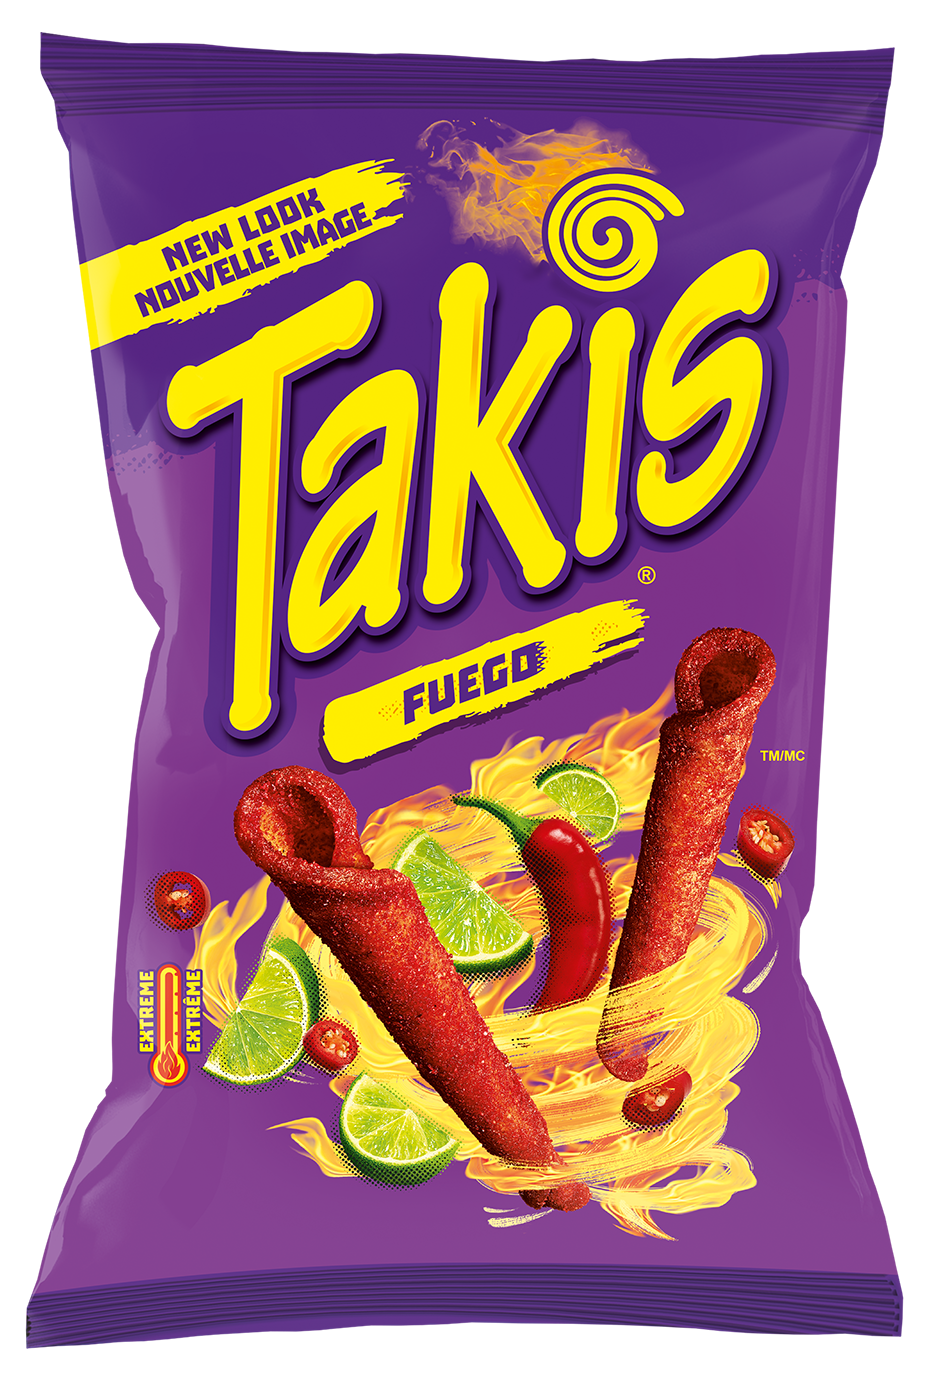 Takis Fuego Rolled Torilla Chips